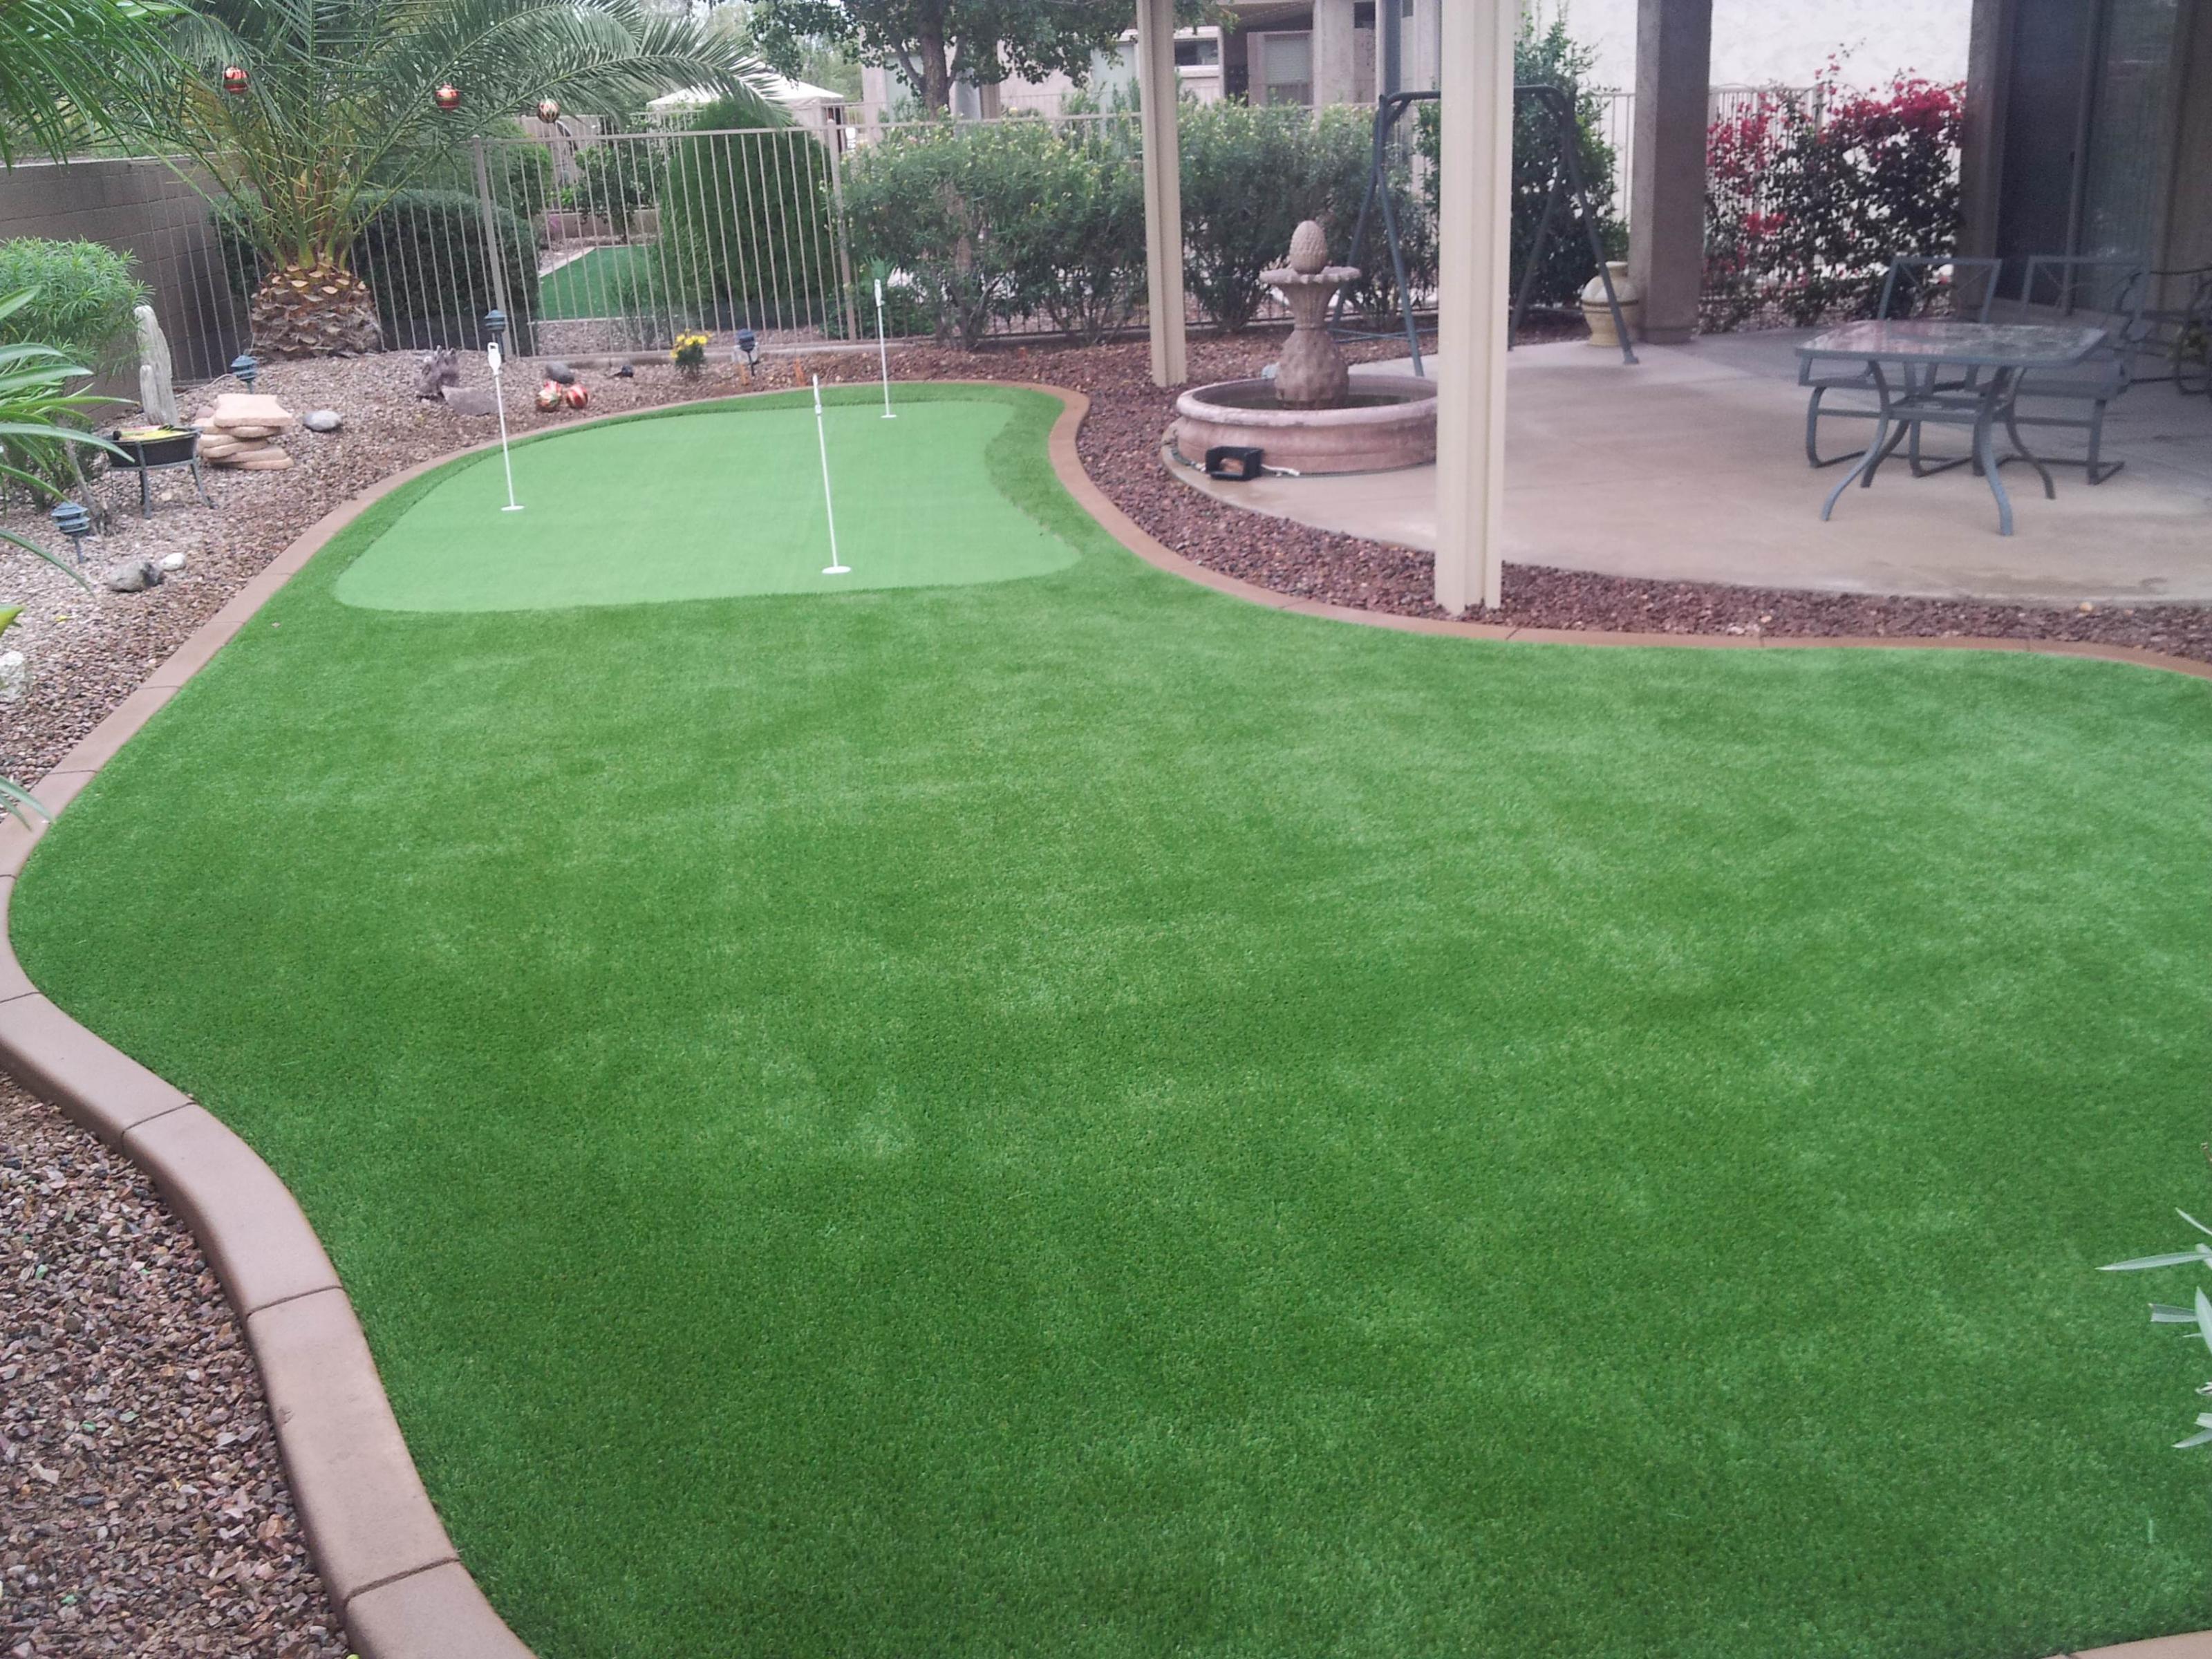 What’s Best Out Of Natural Grass and Chandler Fake Grass?